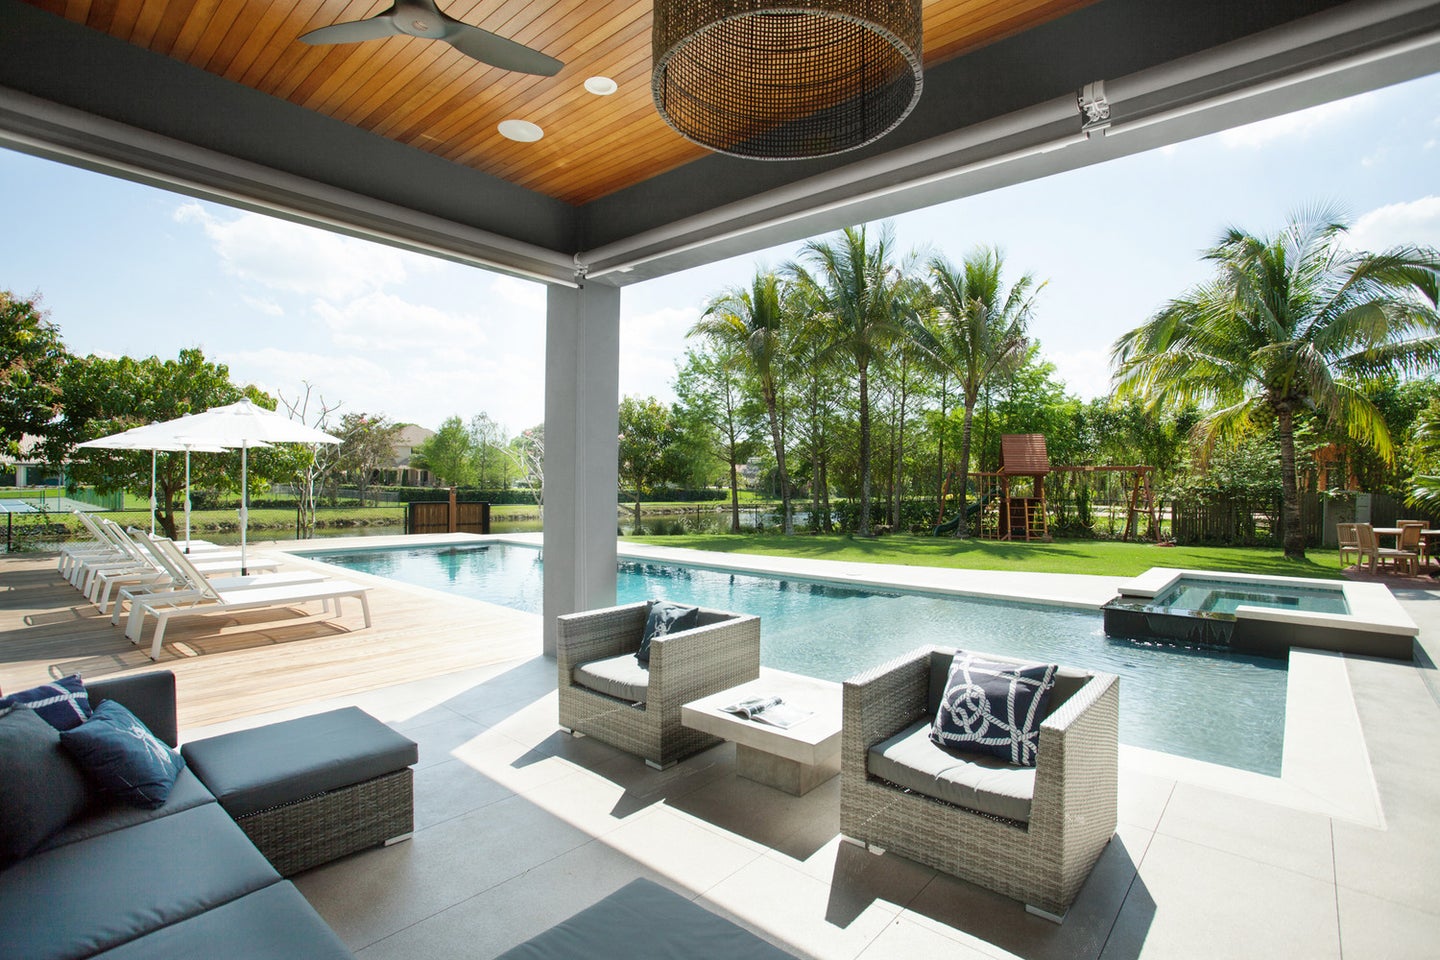 Inside A Florida Home Renovation (Without the Florida Decor) - outdoor patio